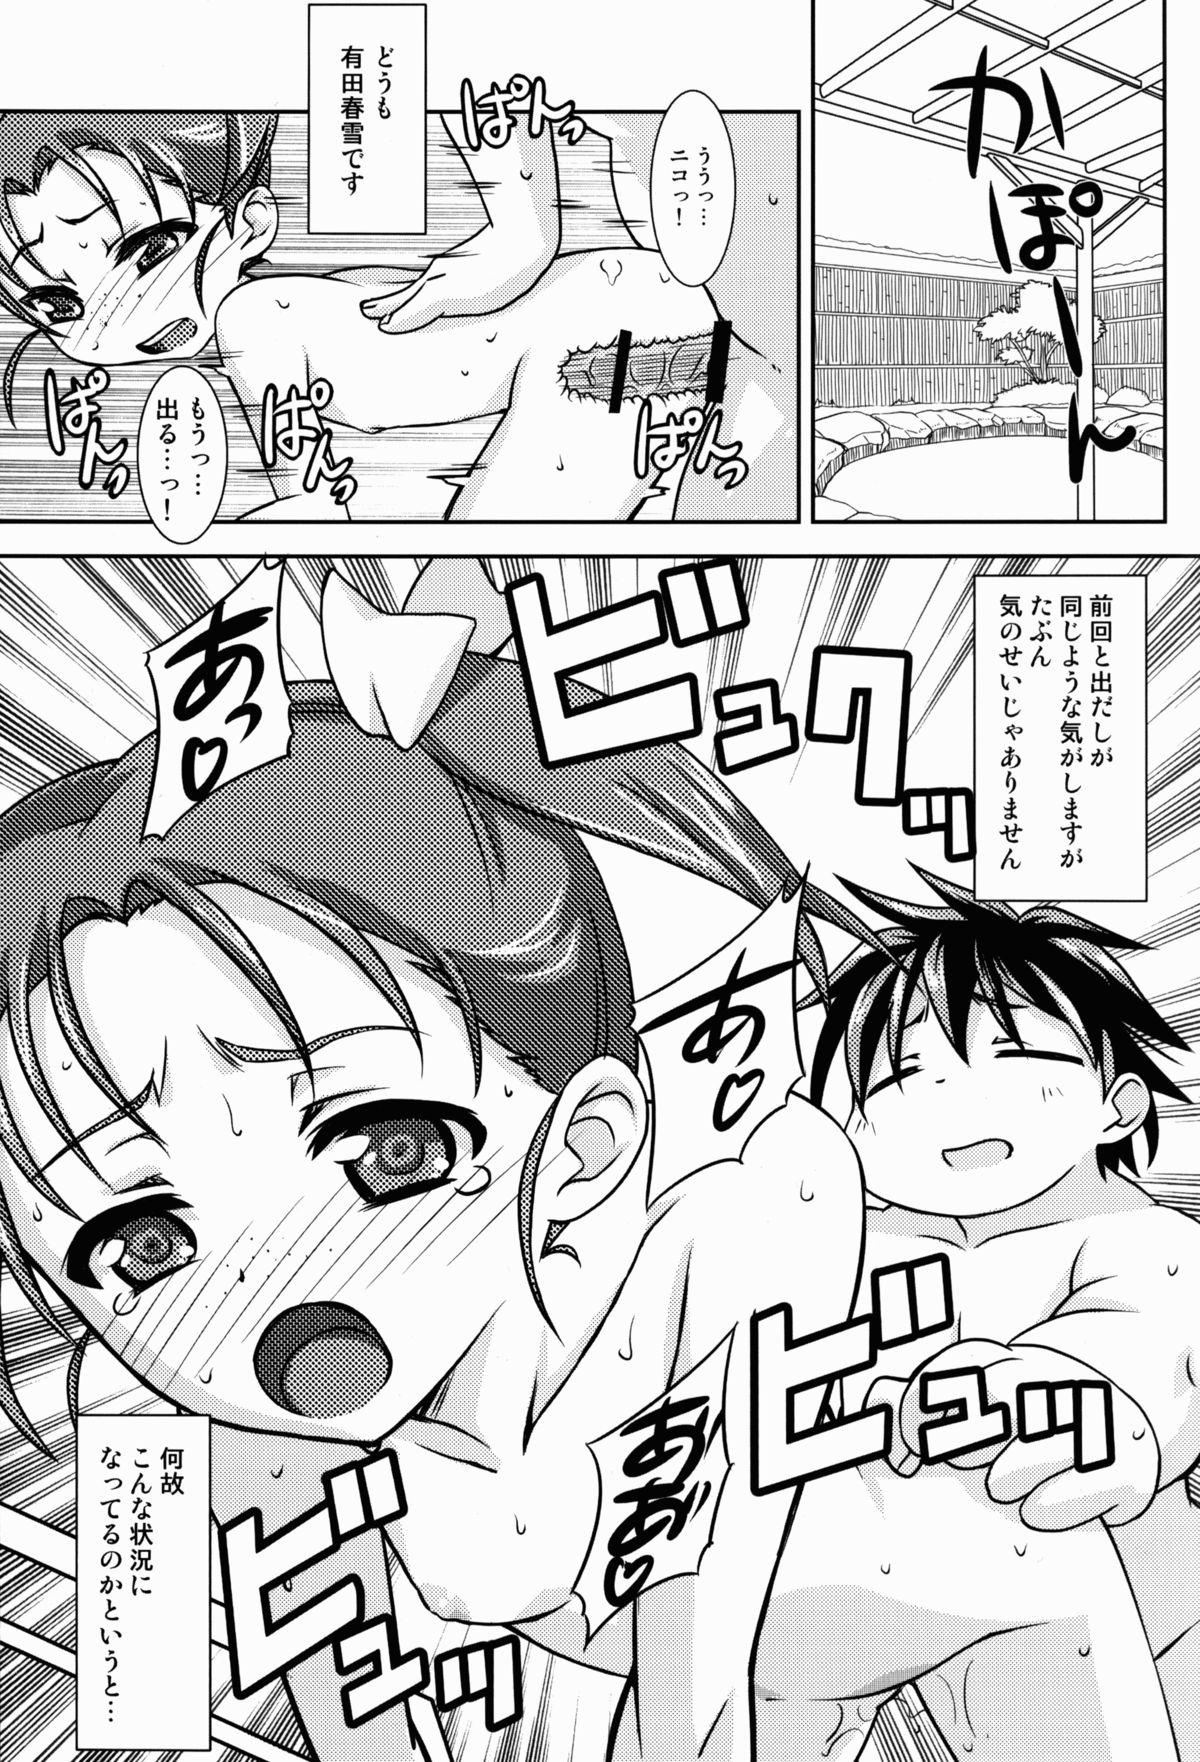 Sharing Houkago Link 2 - Accel world Jerking Off - Page 3